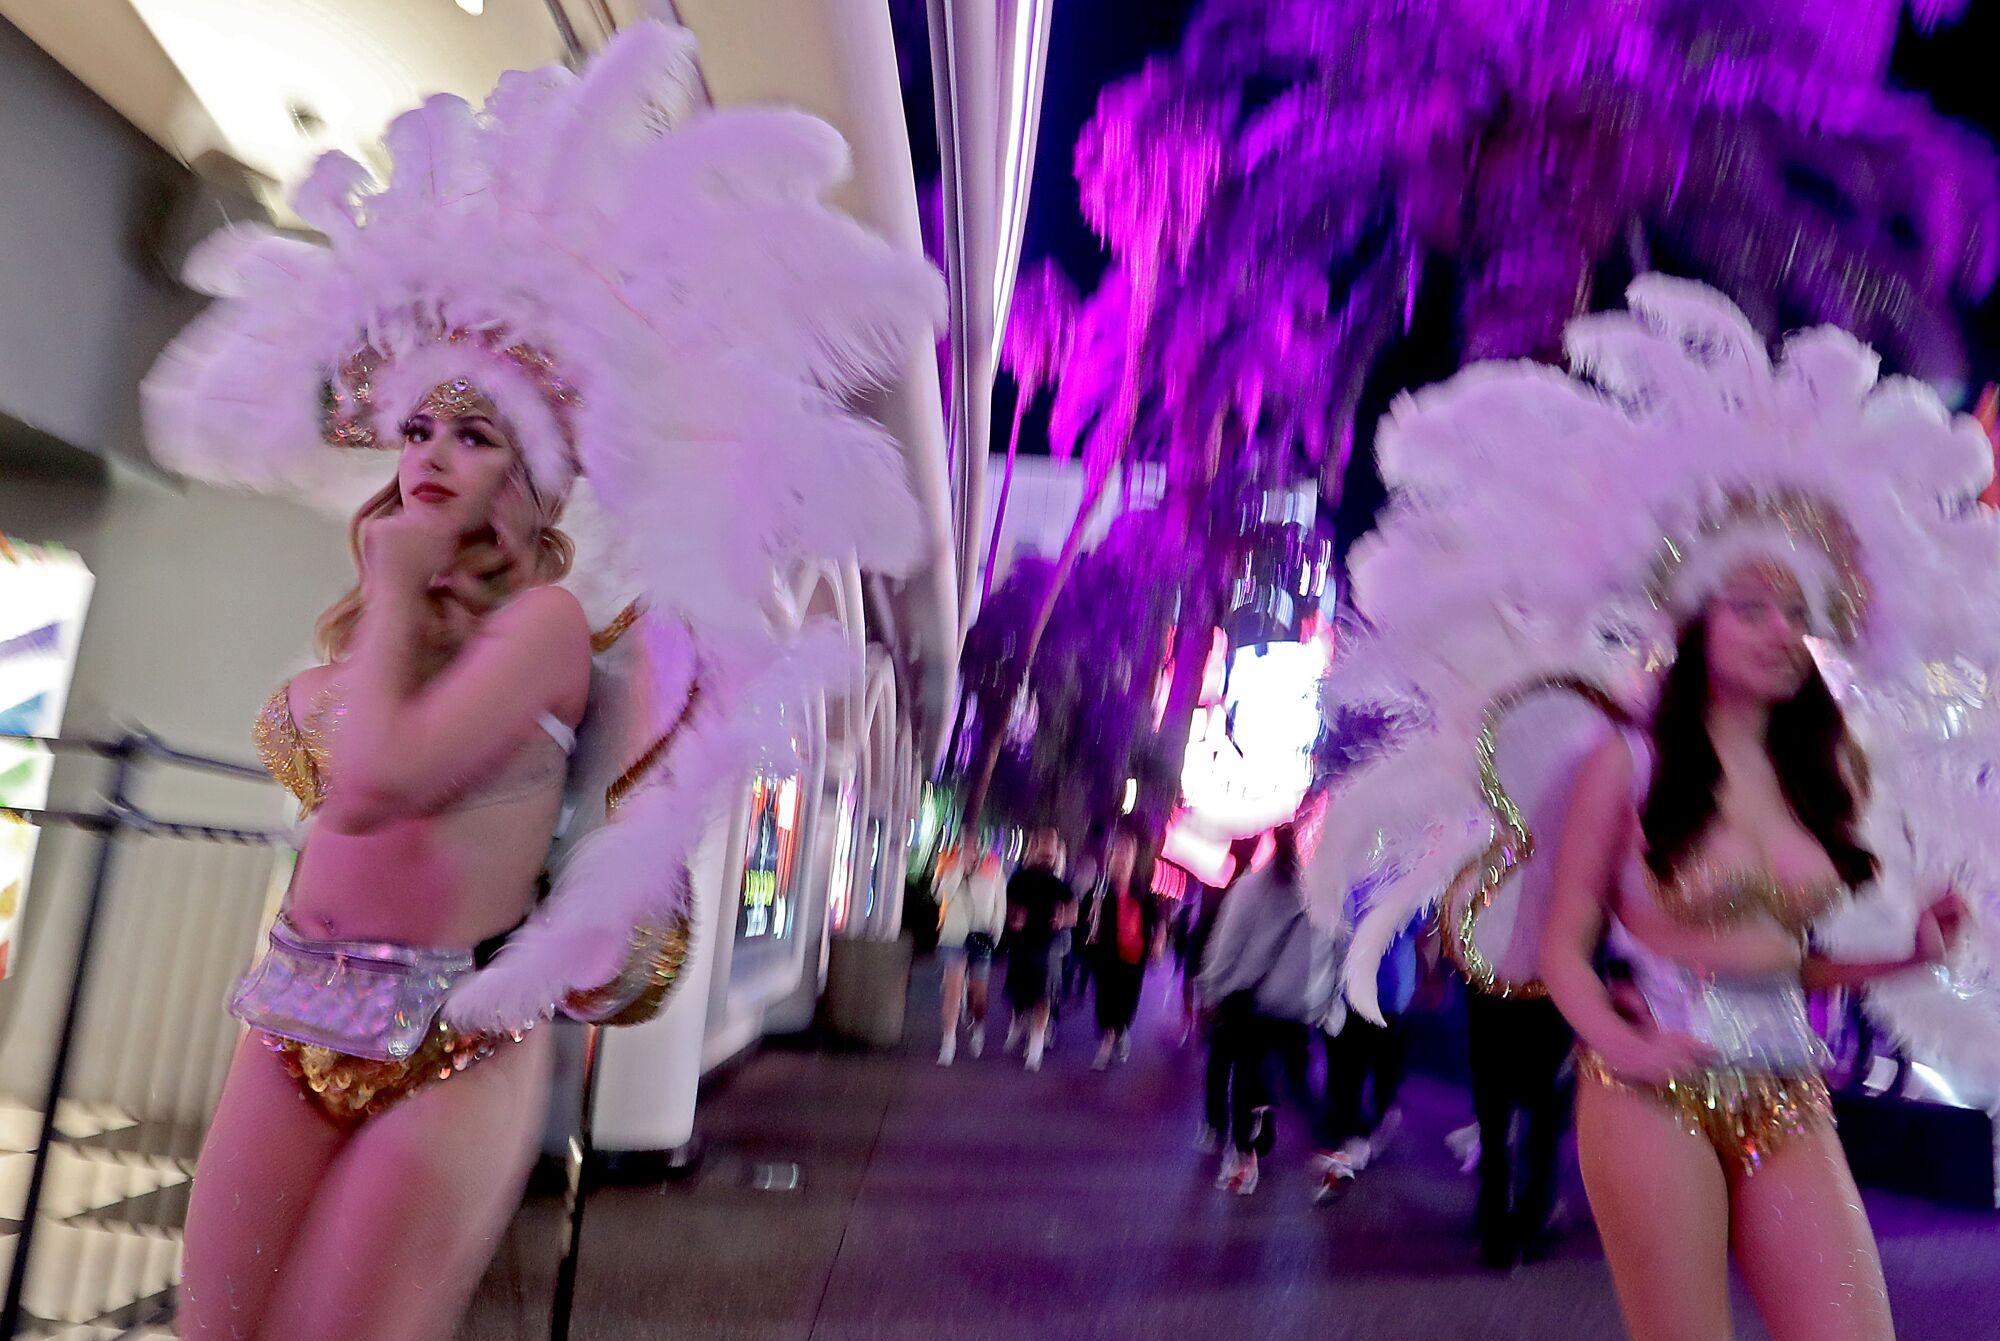 Women in showgirl costumes walk down the Las Vegas Strip, one of the biggest entertainment centers in the world.